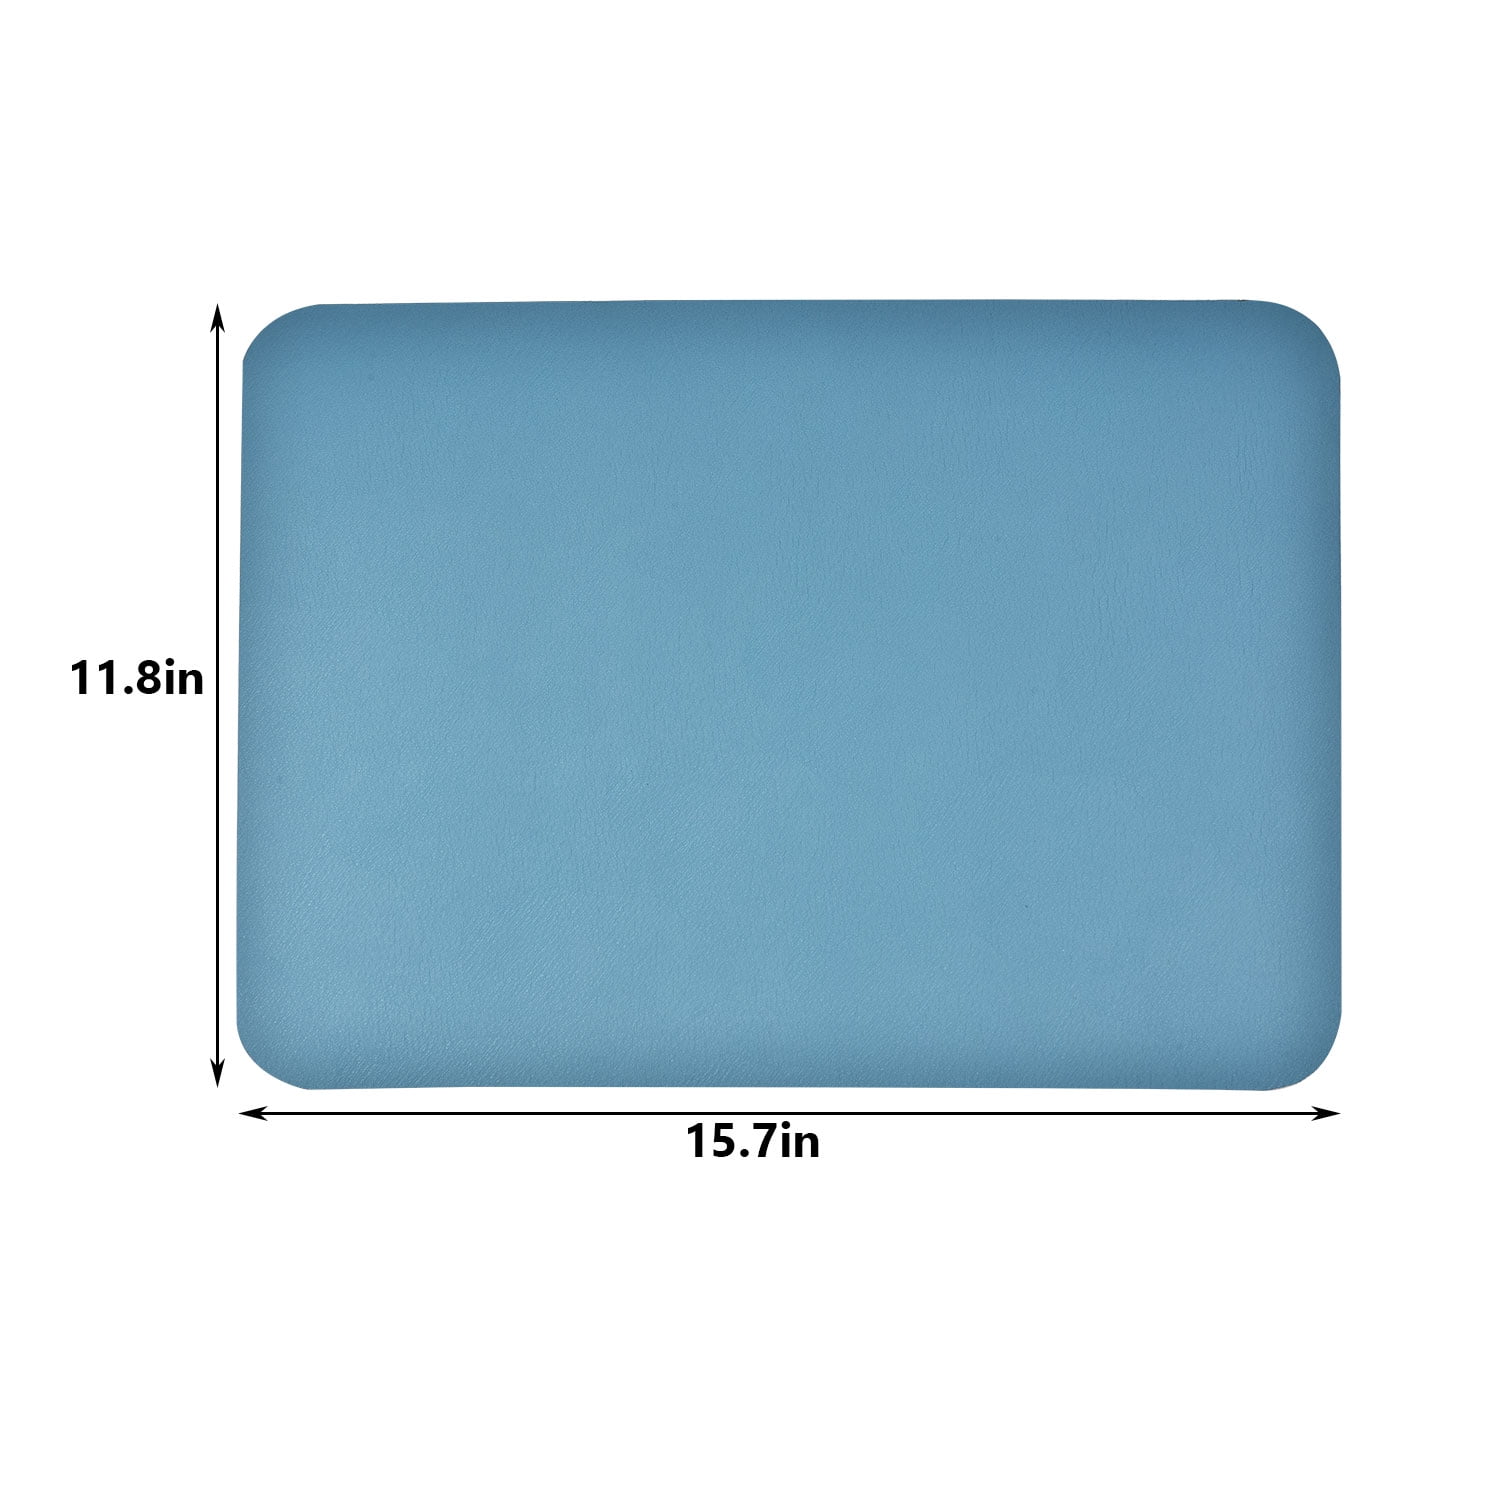  DEXI Drying Mat Kitchen Counter Coffee Bar Accessories Dish  Rack Tray Station Pad Cofee Maker Mats for Countertops,Absorbent Quick Dry,  12x19 Blue: Home & Kitchen